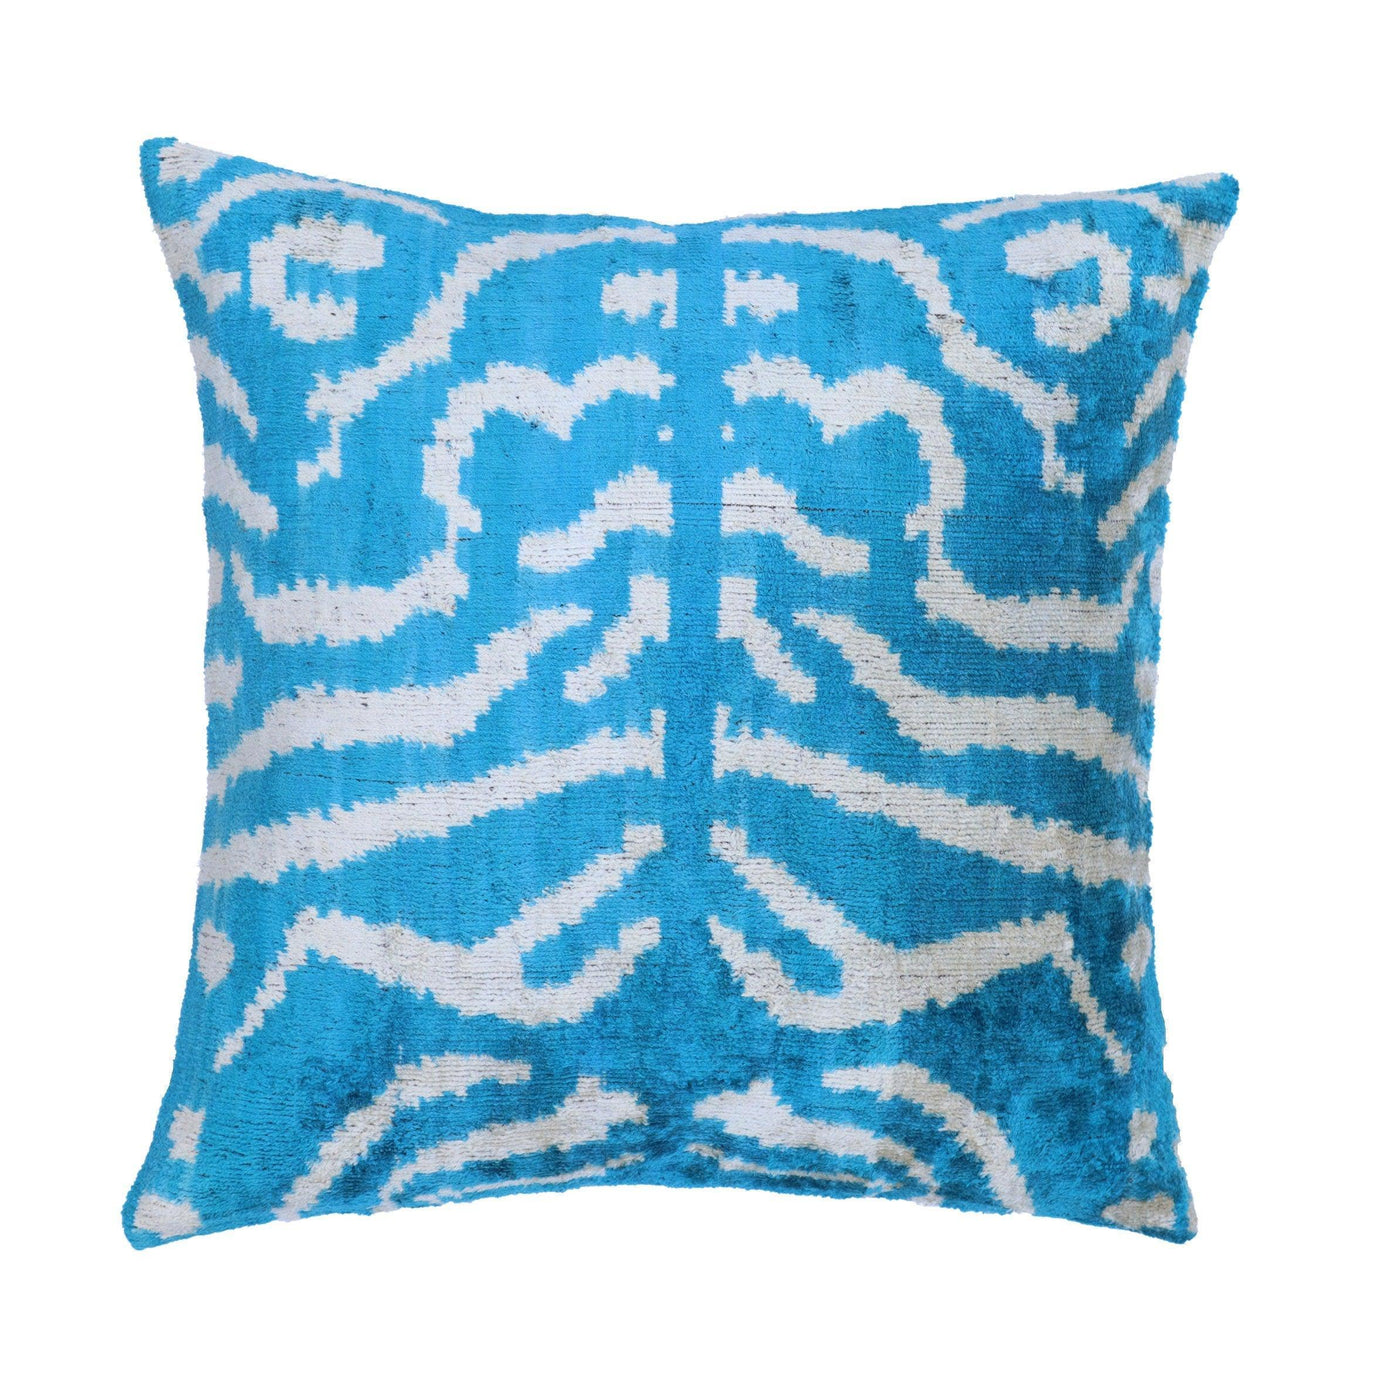 Canvello Luxury Blue Throw Pillows For Couch - 16x16 inch